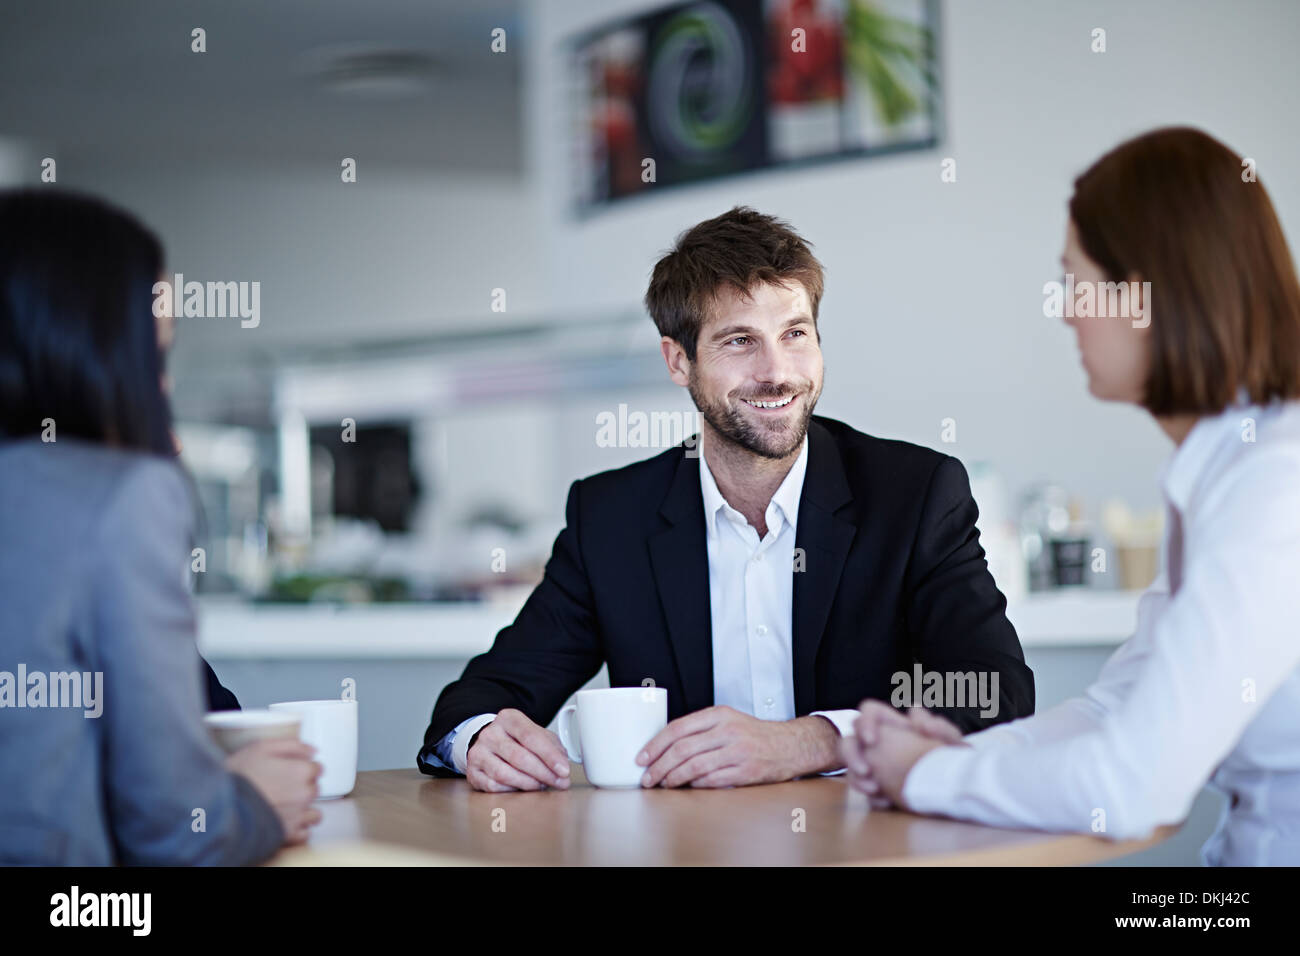 Business people talking in cafe Stock Photo